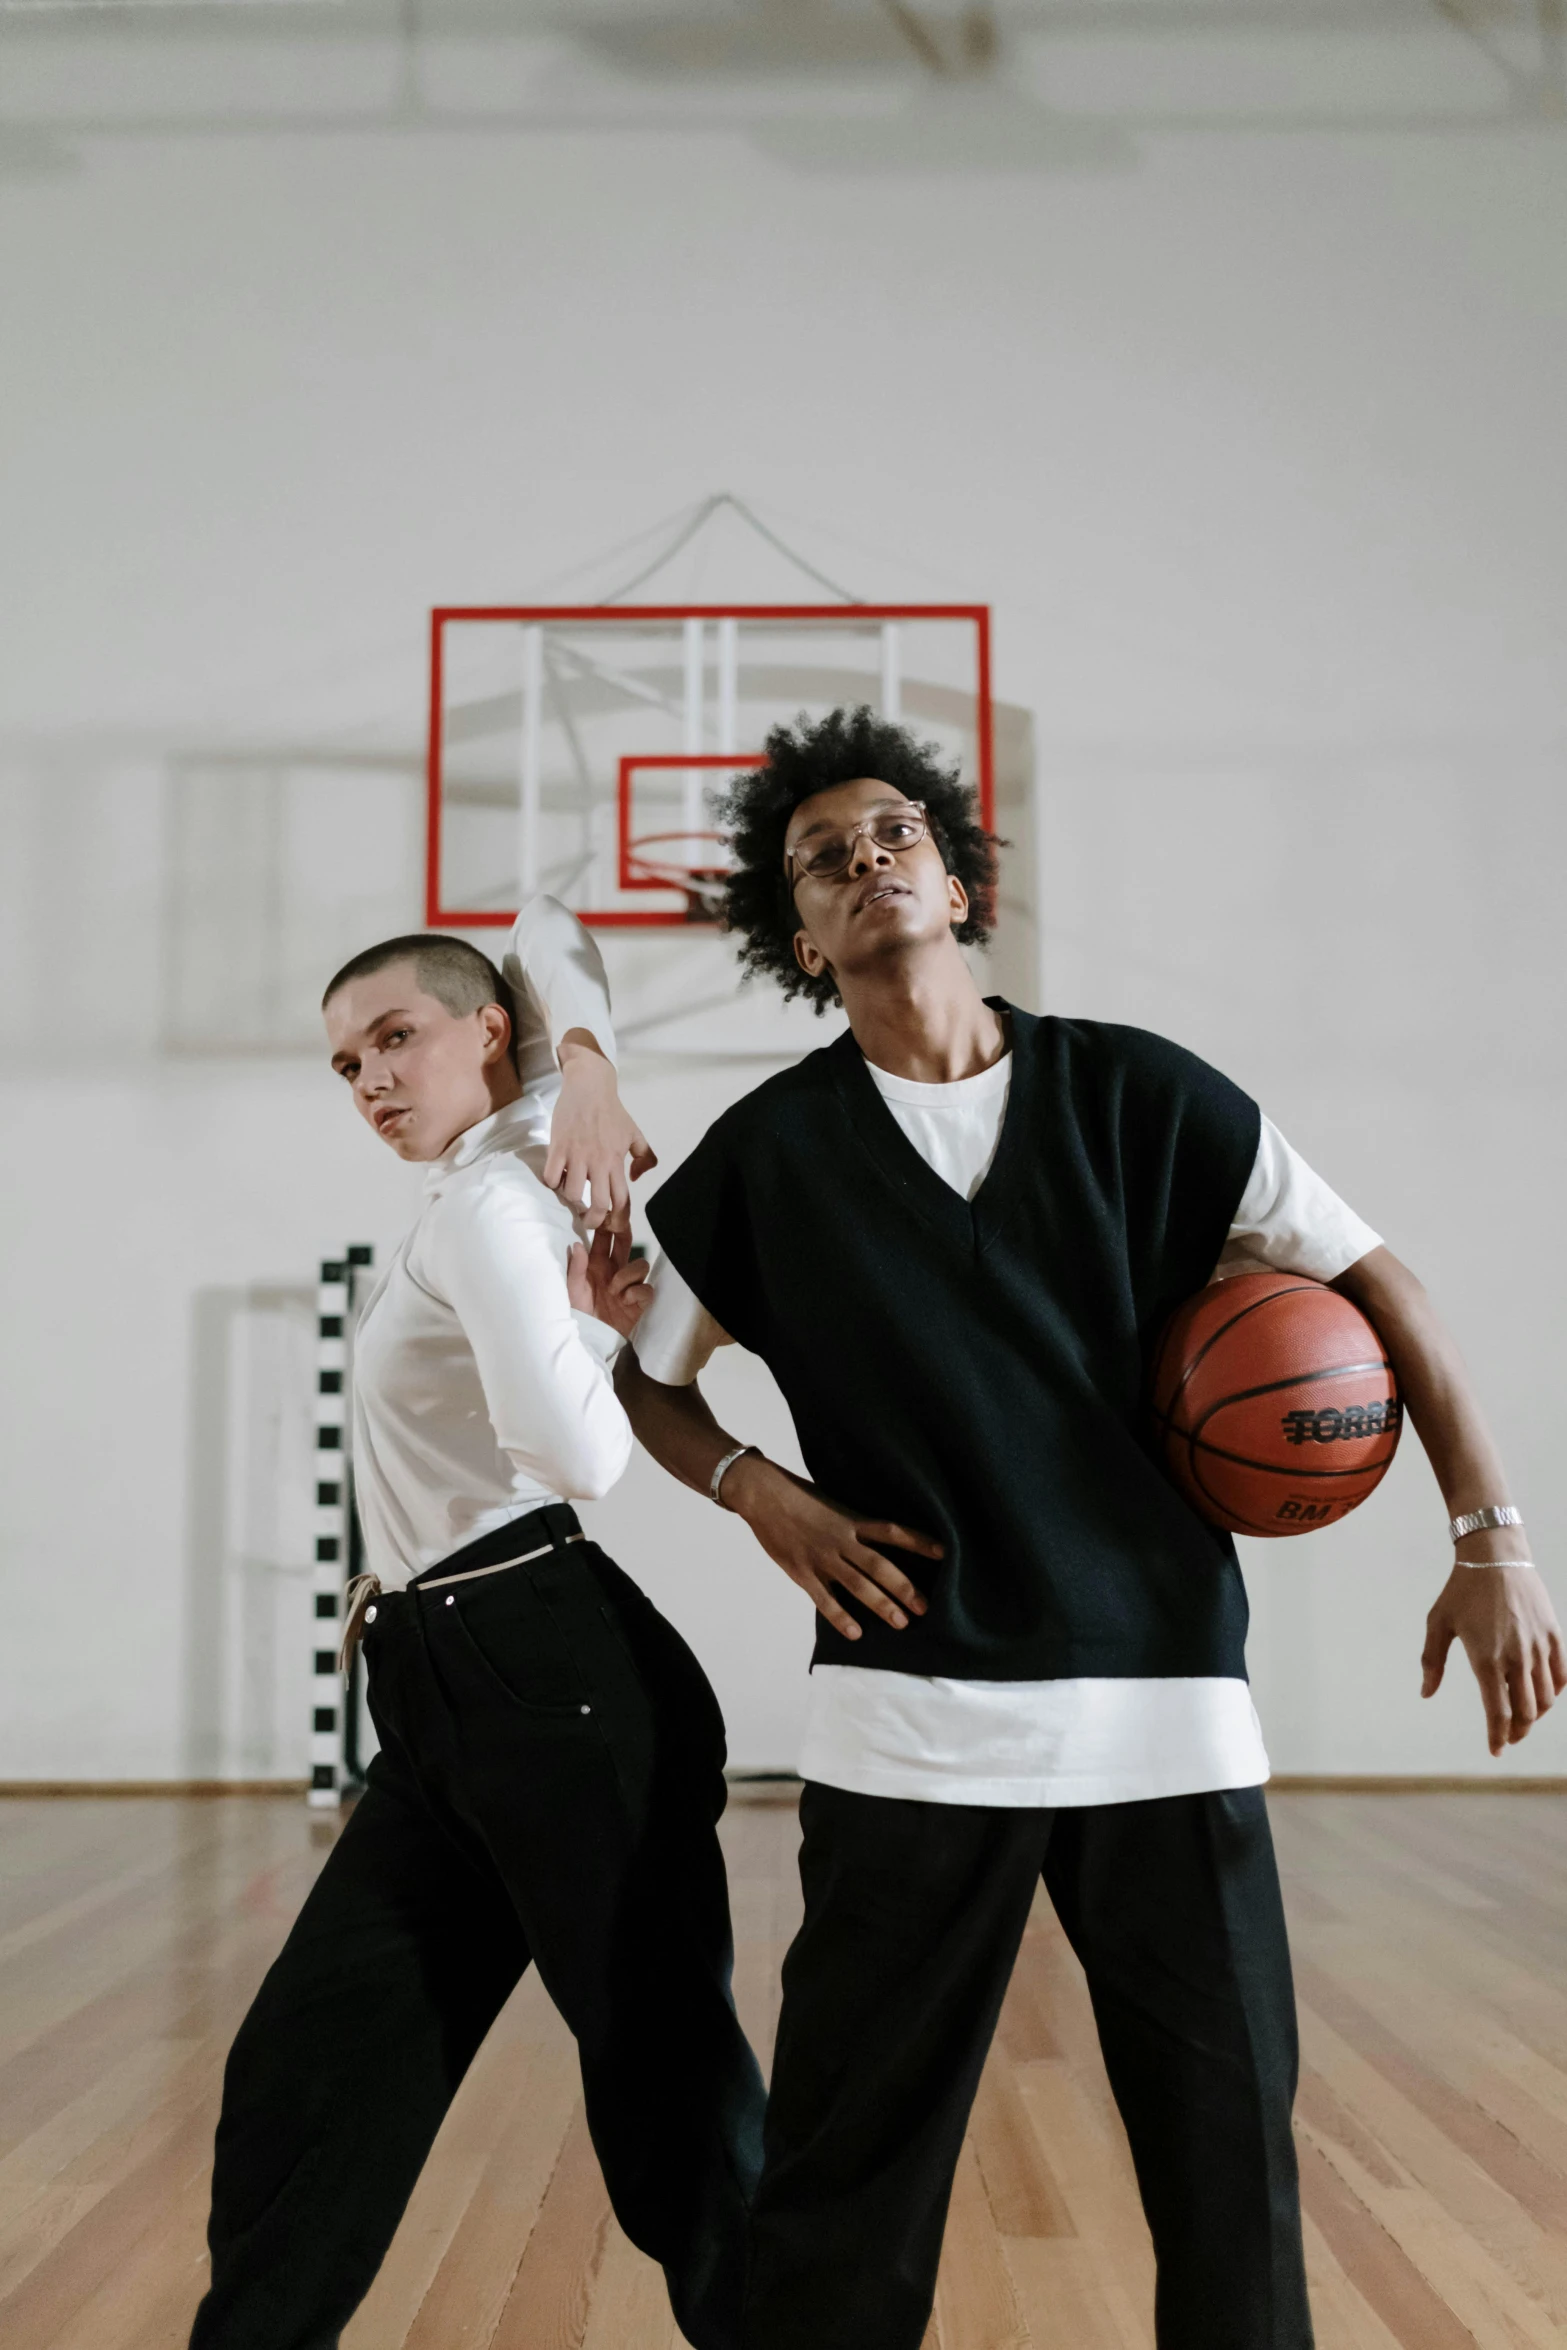 a couple of people playing a game of basketball, an album cover, trending on dribble, antipodeans, medium shot portrait, performing a music video, white and black clothing, androgynous